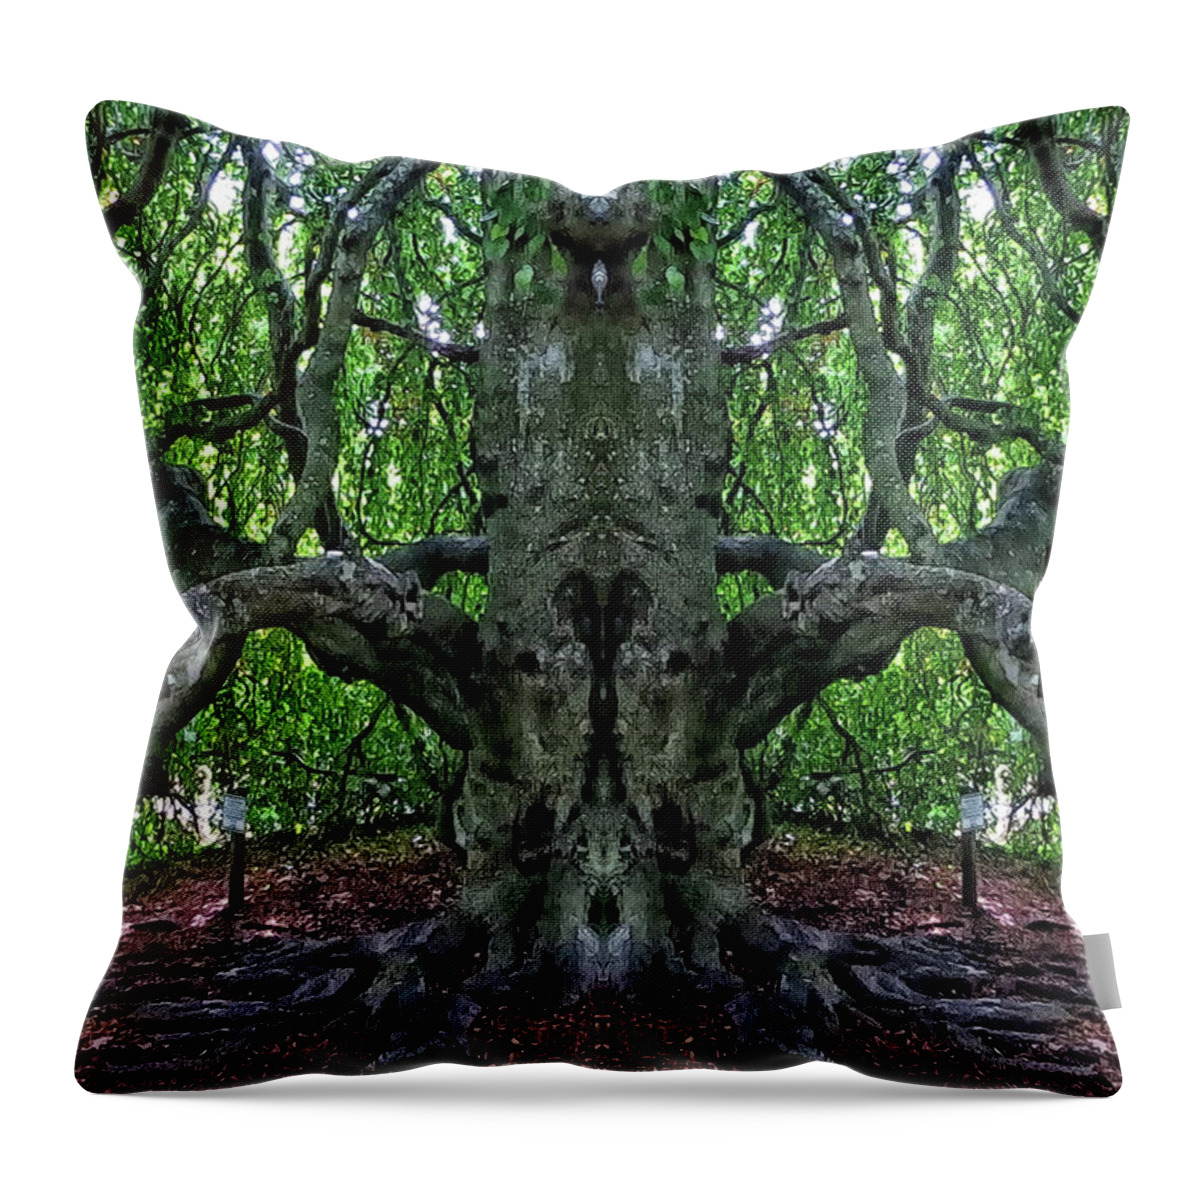 Mirror Image Pareidolia Throw Pillow featuring the photograph Beech Tree Image Pareidolia by Constantine Gregory